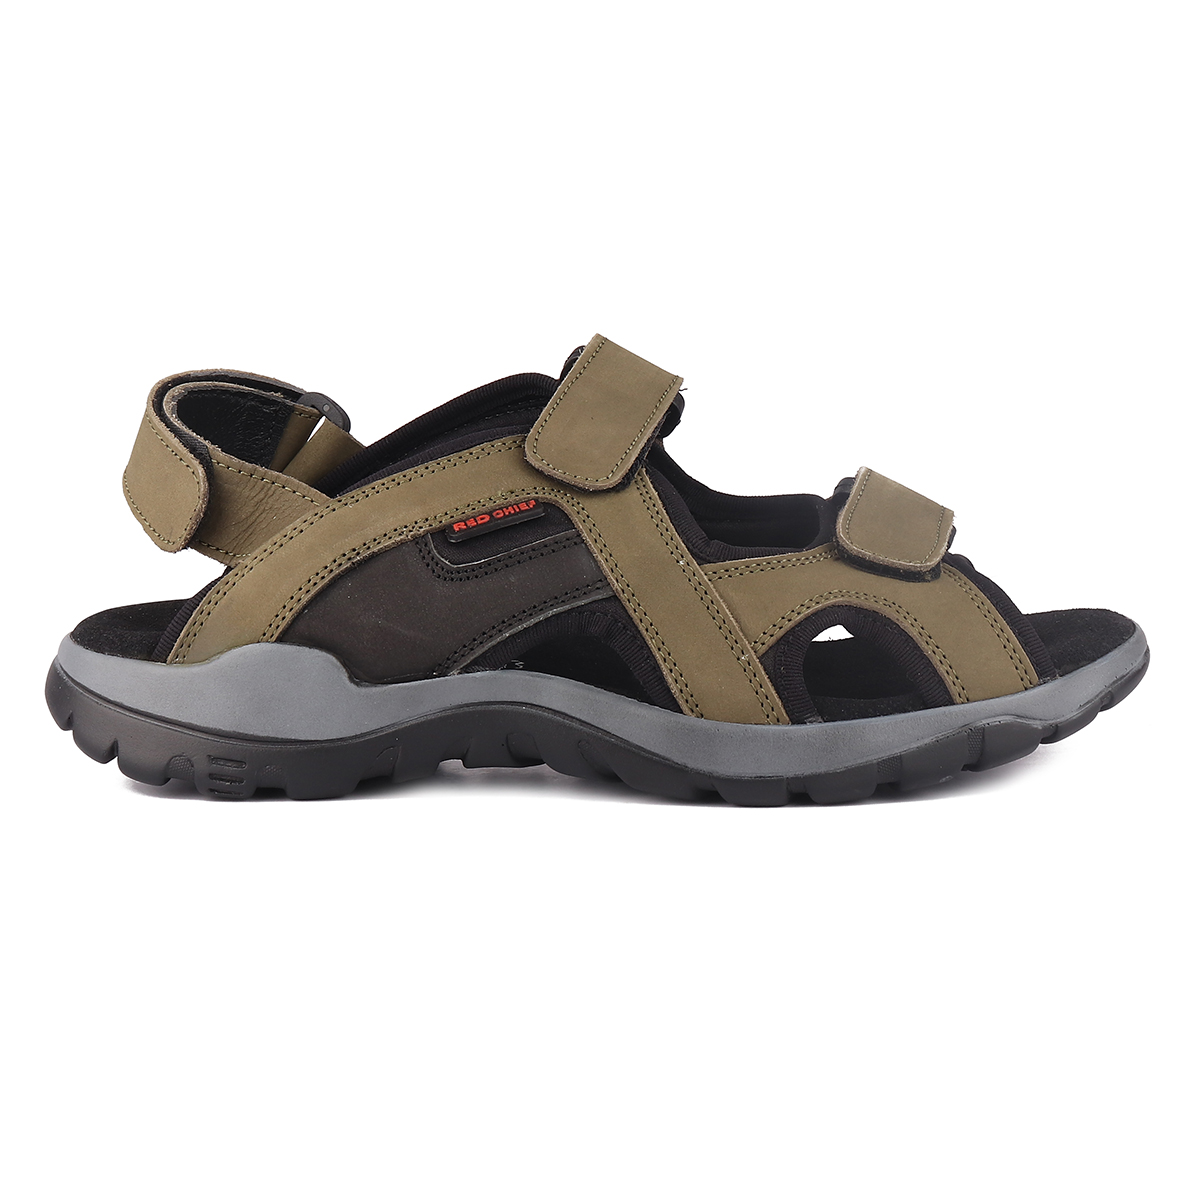 Buy blue Sandals for Boys by Campus Online | Ajio.com